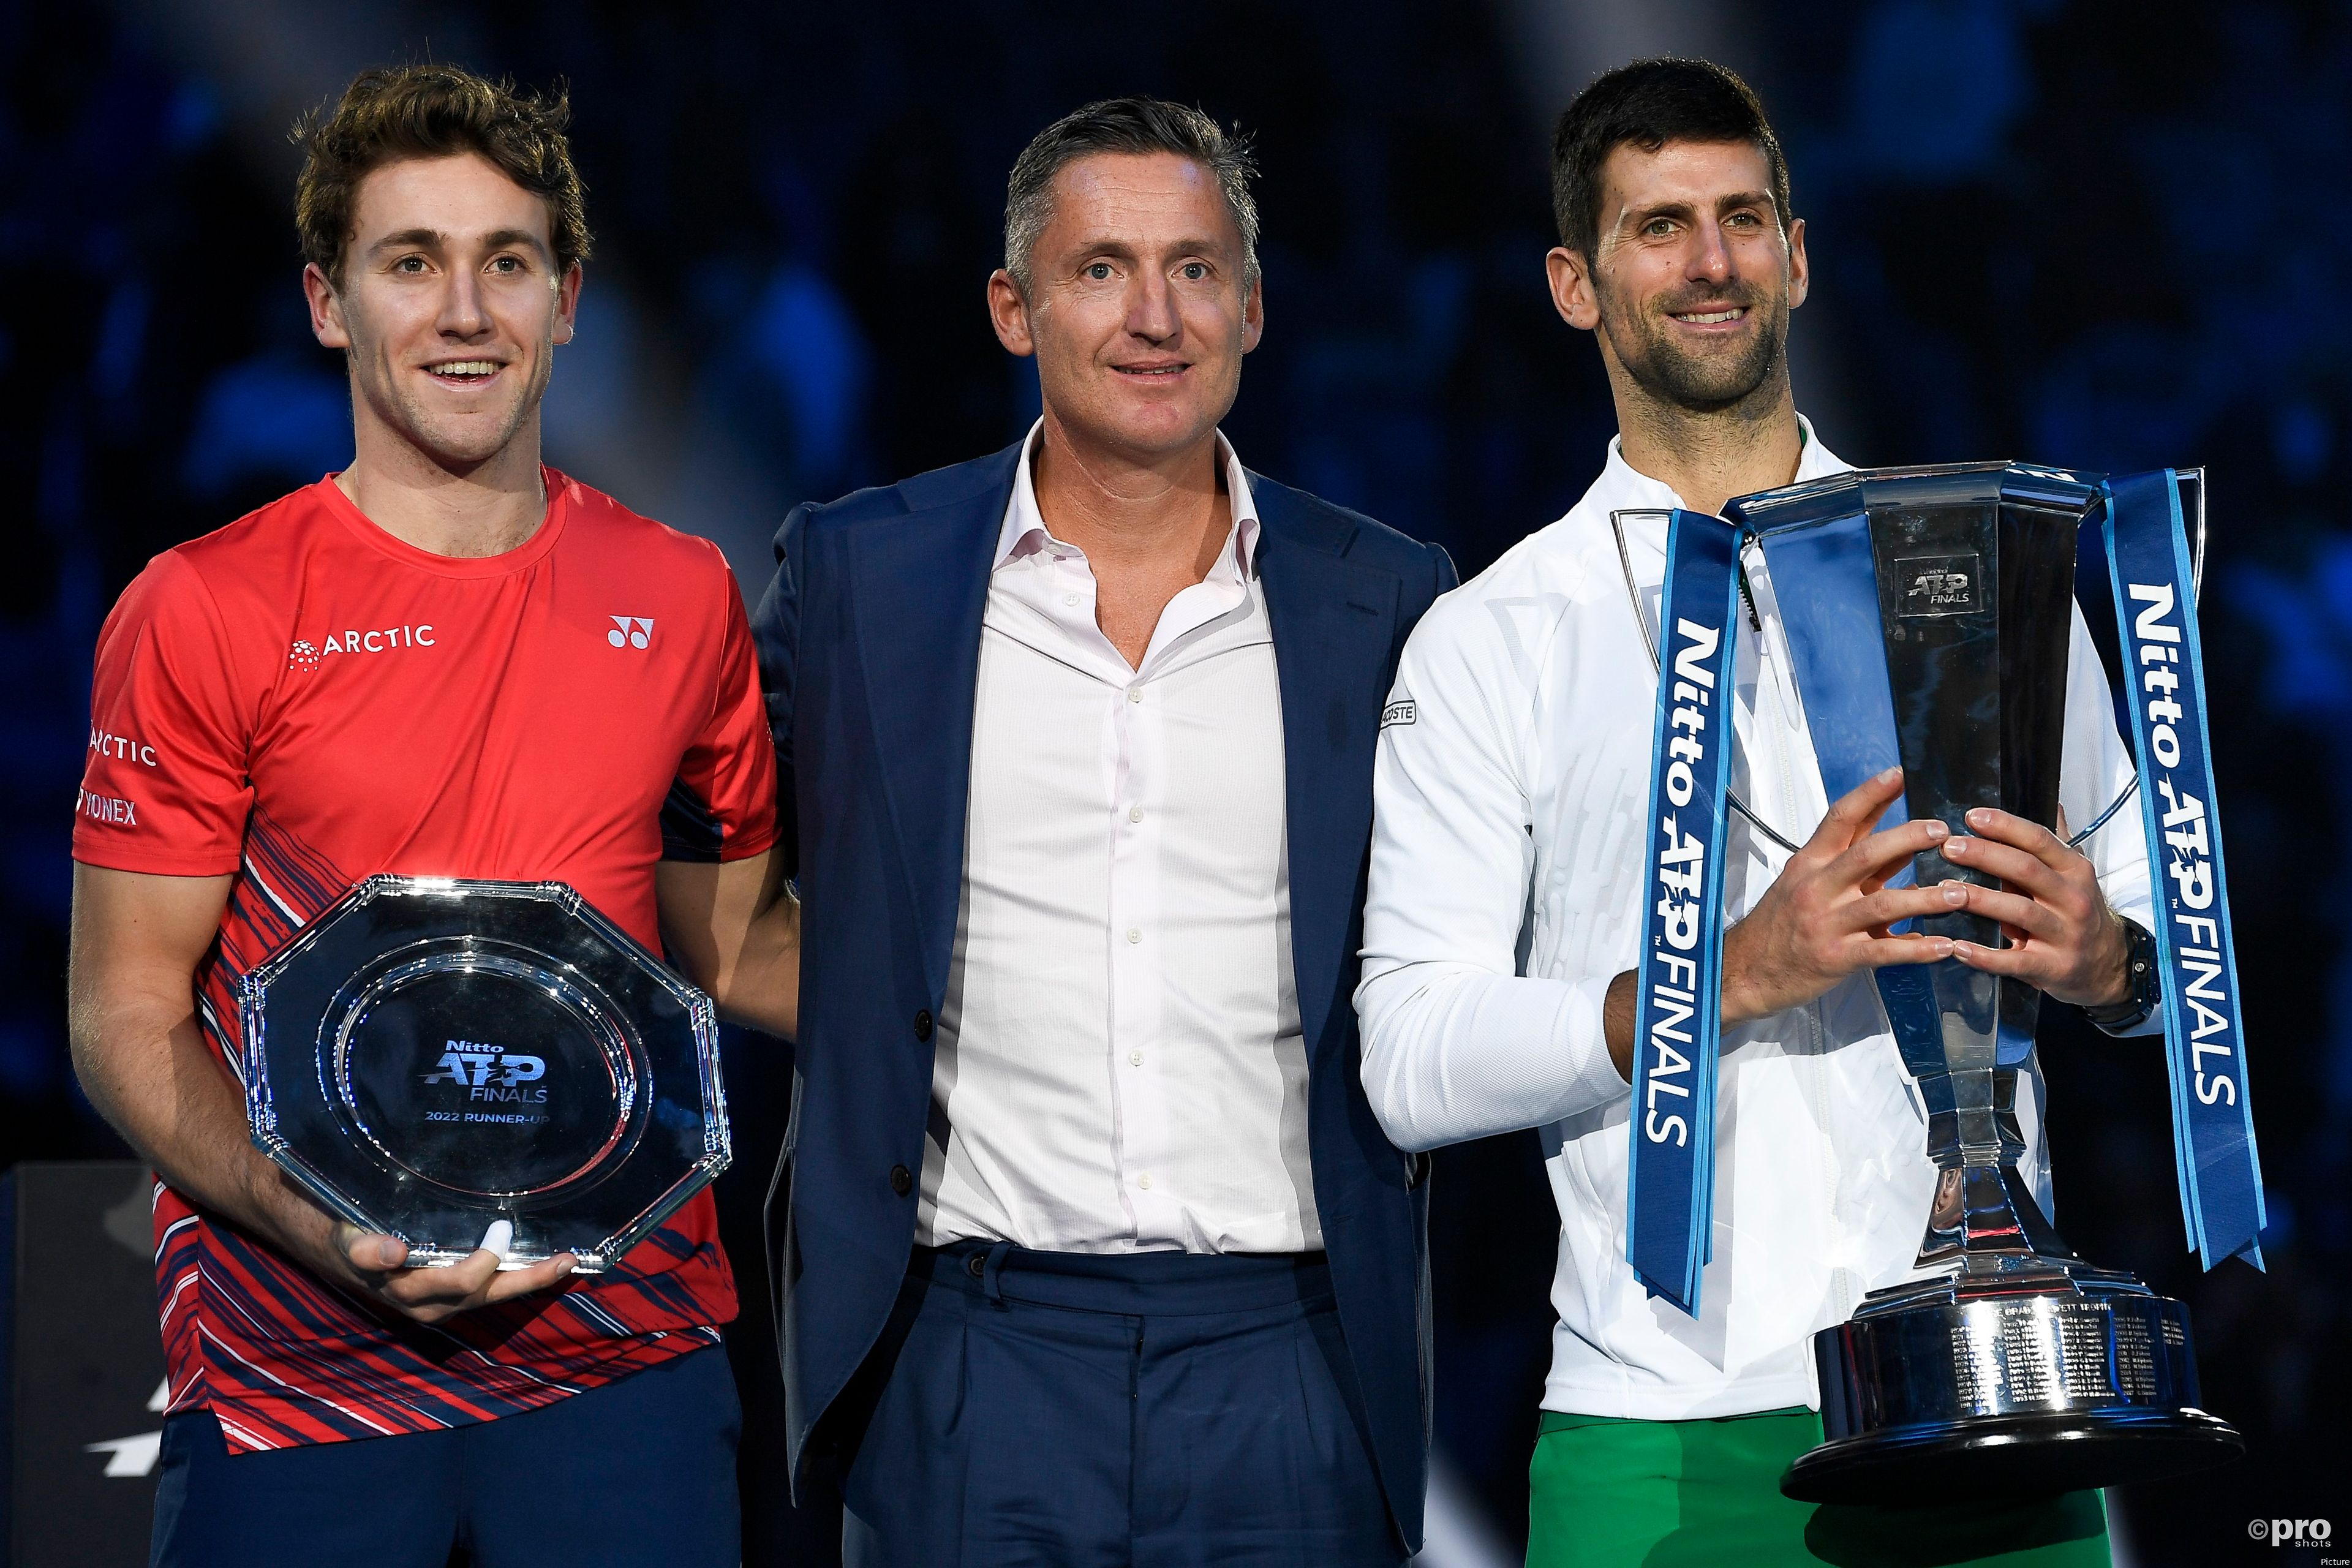 Djokovic grabs the title in the 2022 ATP Finals against Ruud